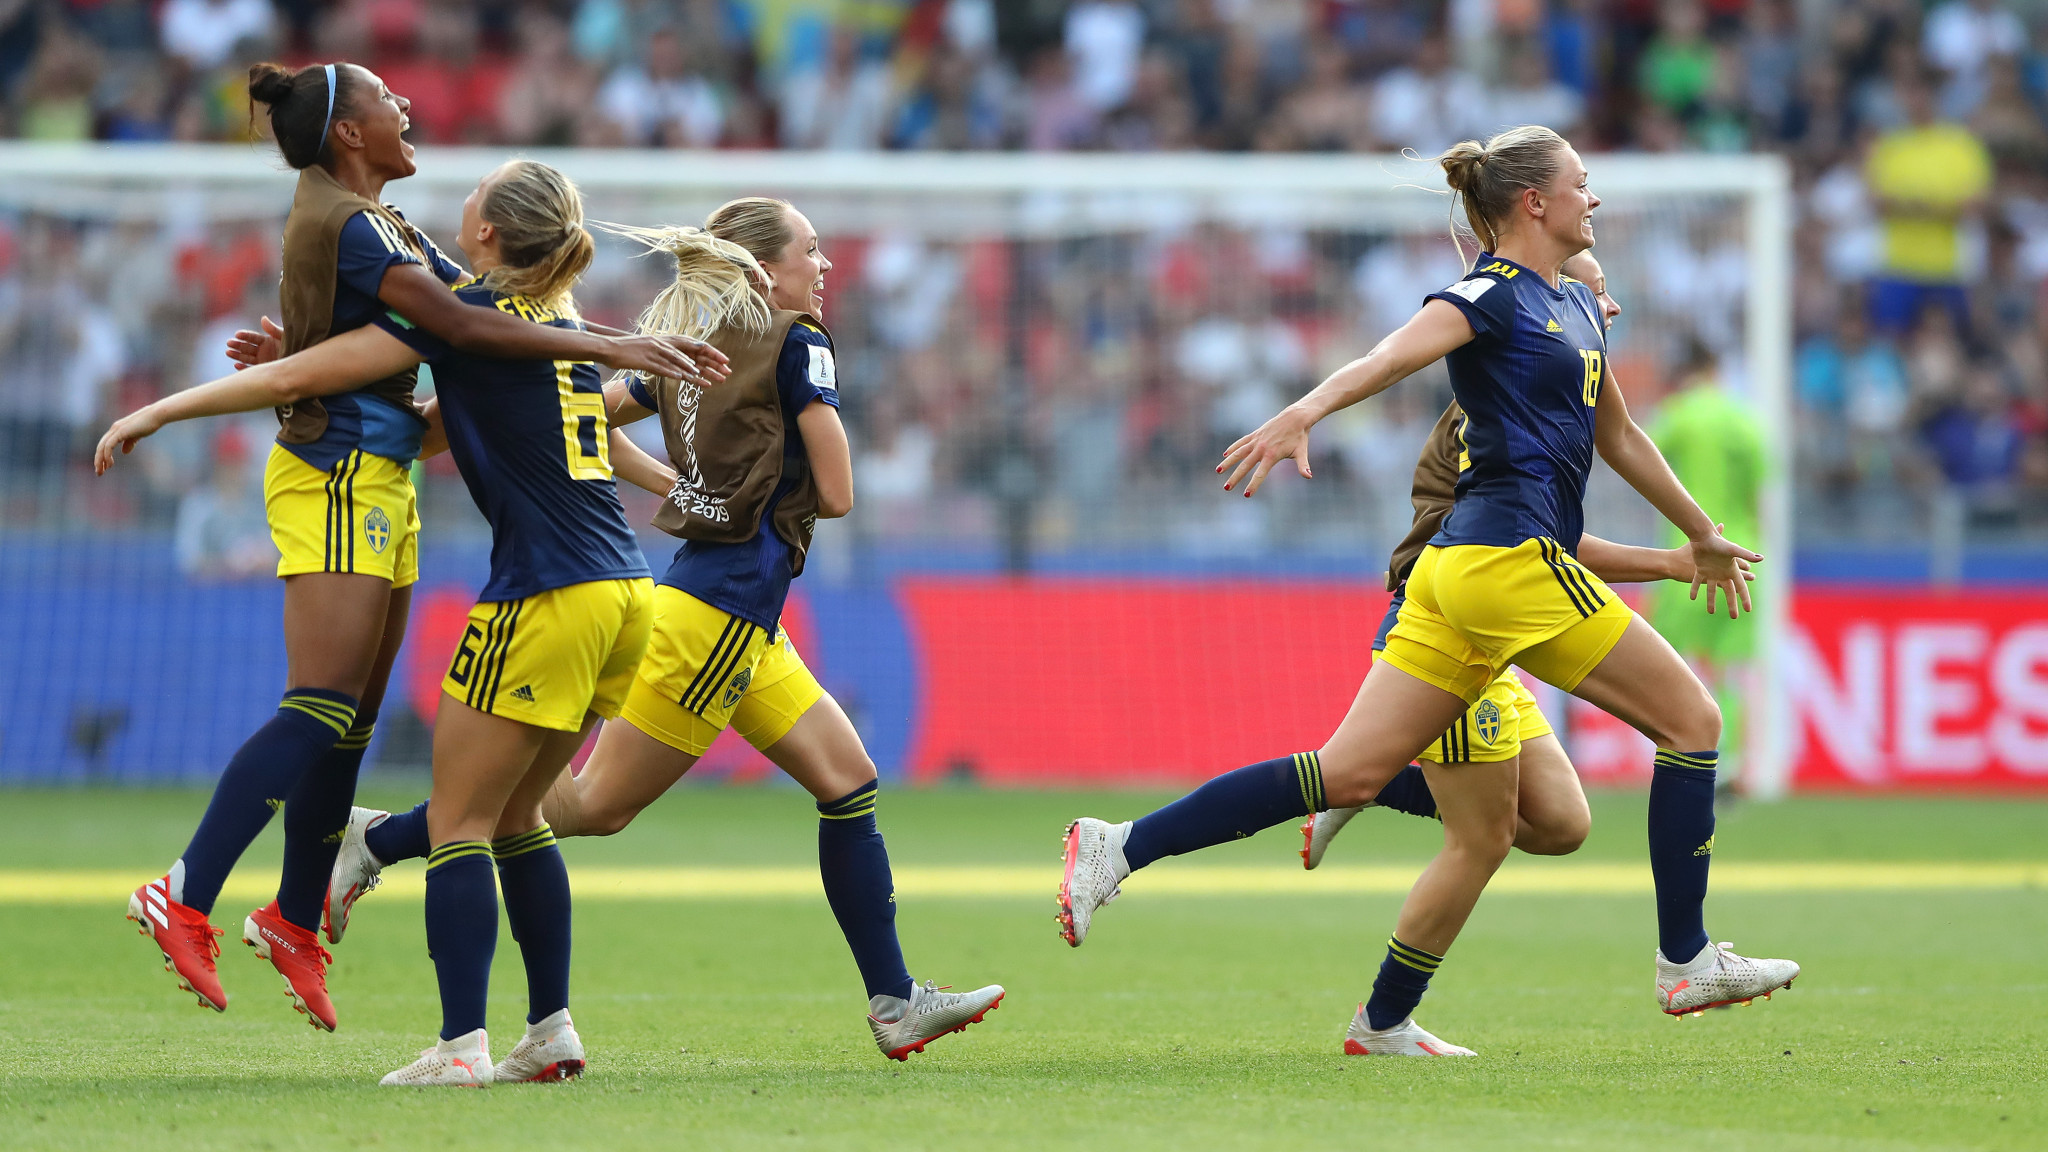 Sweden stun Germany to book last place in FIFA Women's World Cup semi-final